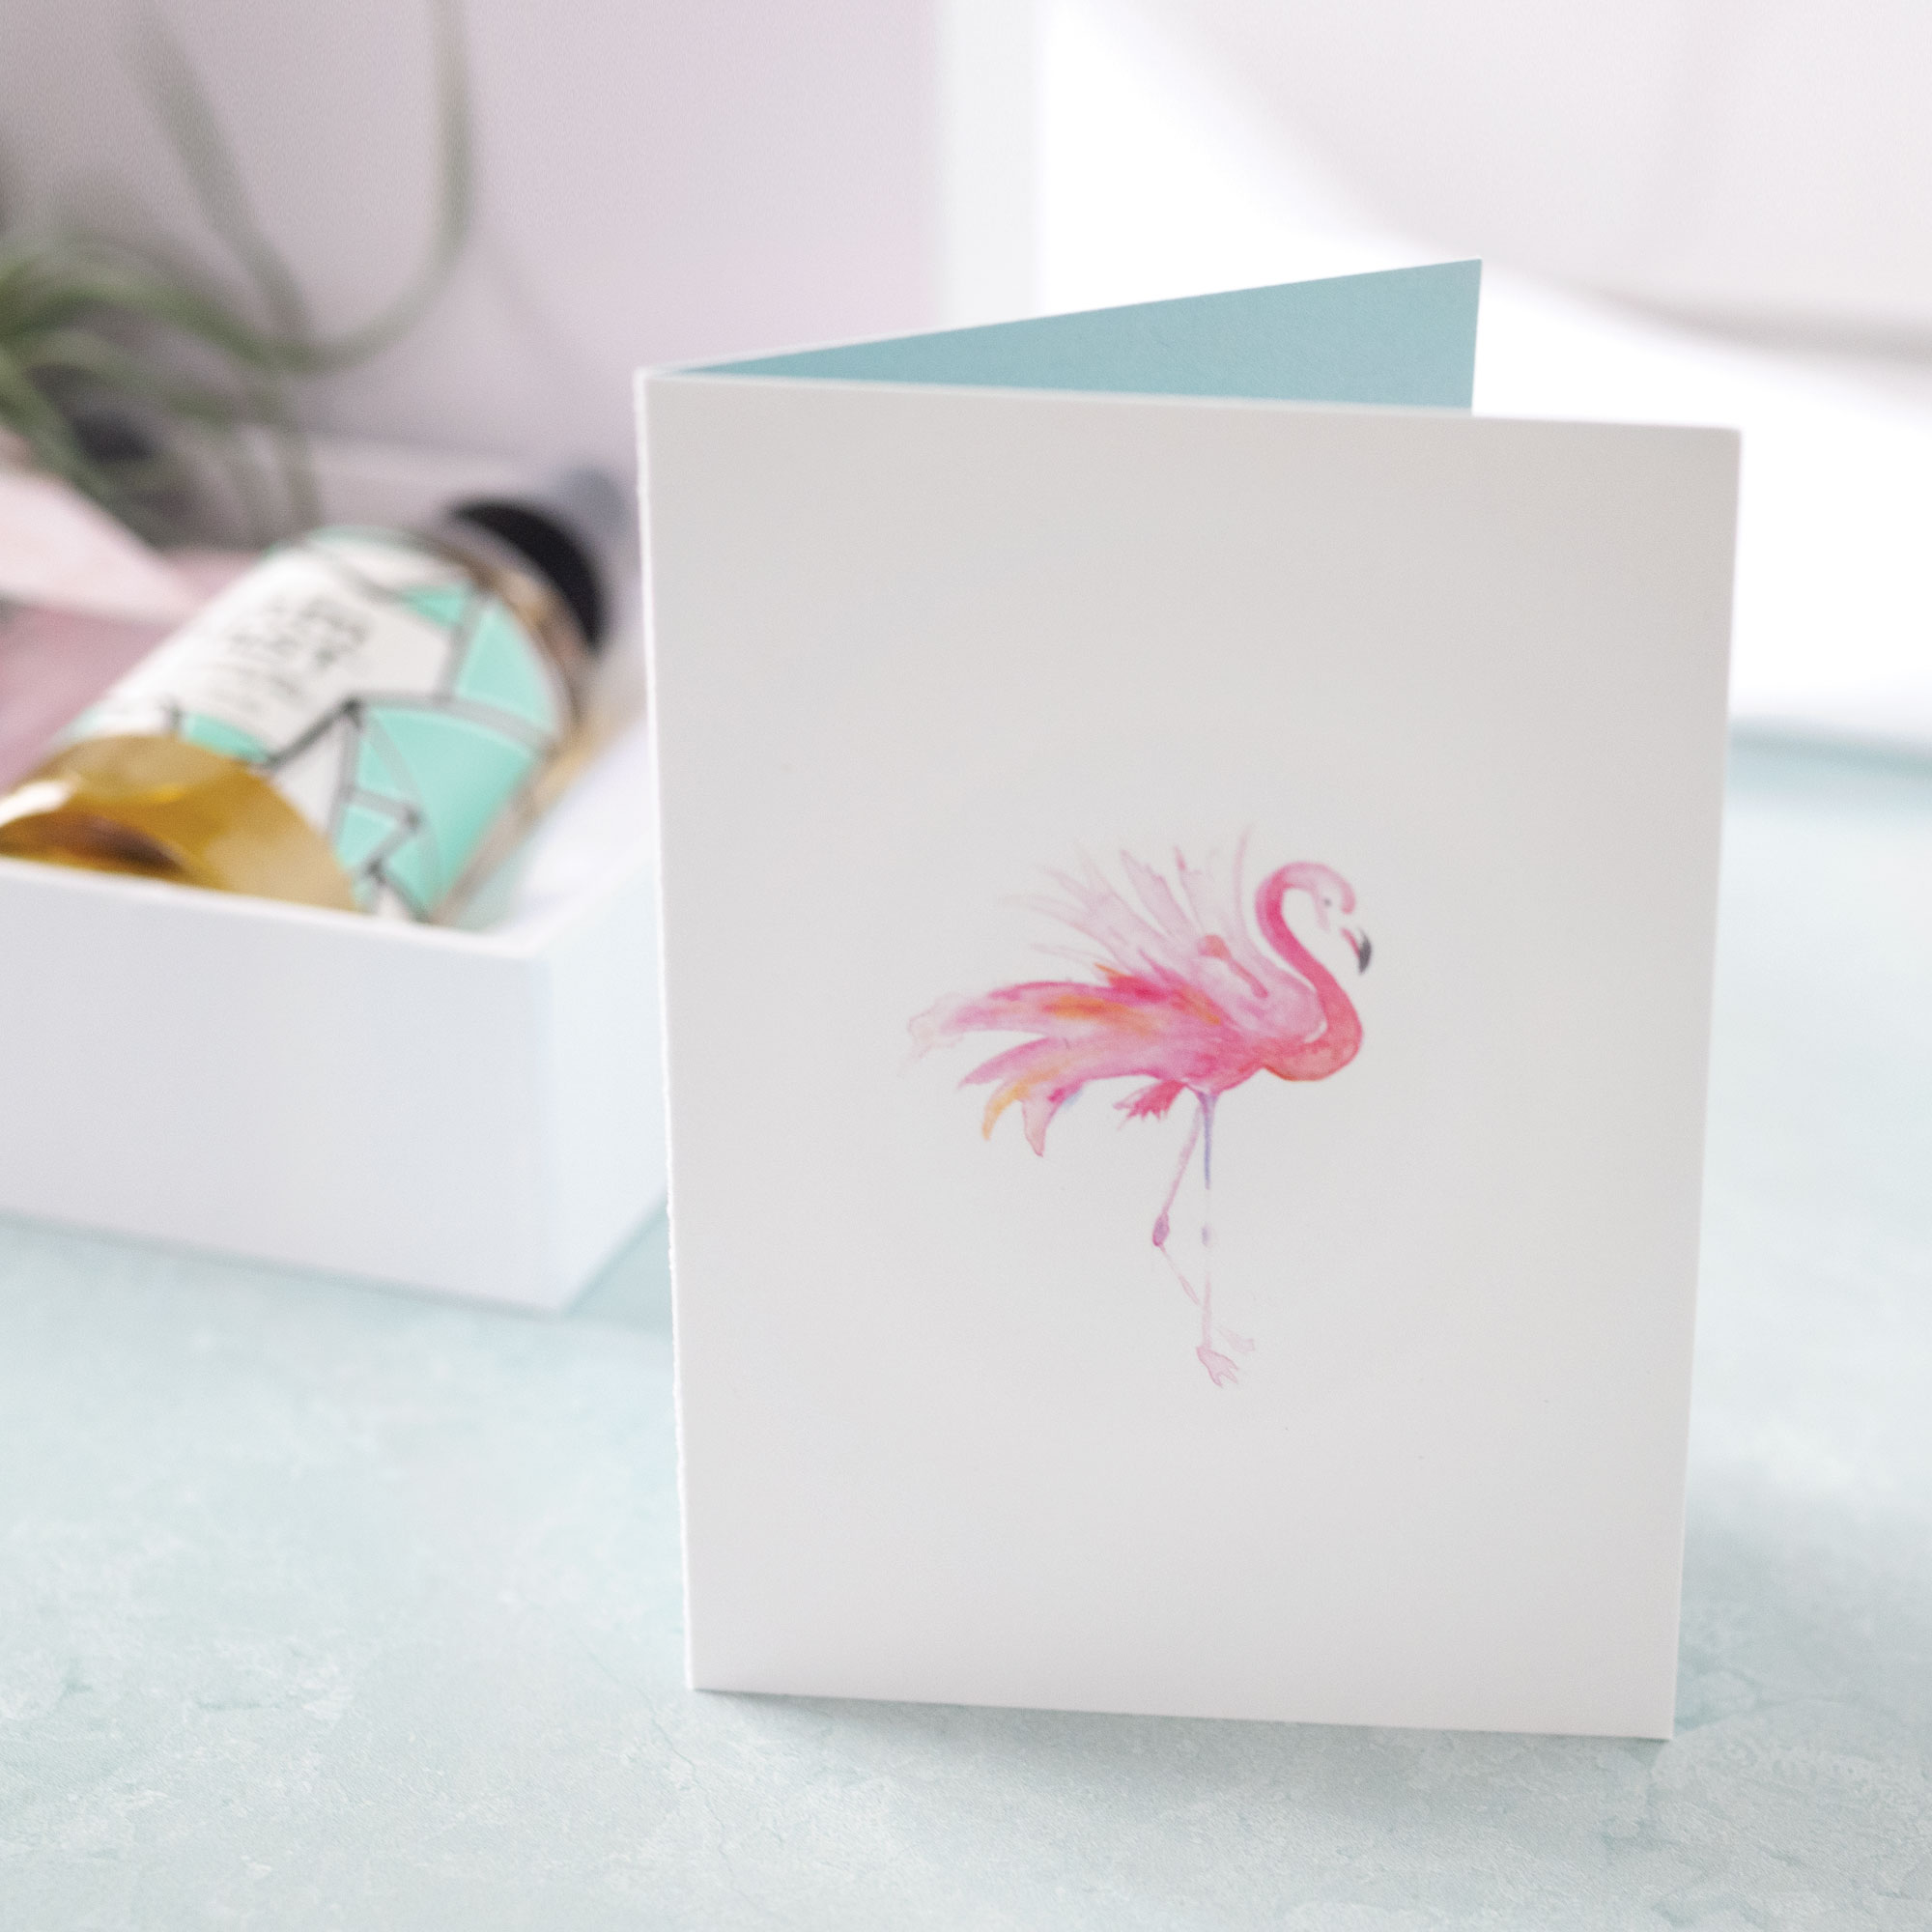 This blank watercolor pink flamingo card is perfect to write your bridesmaid proposal.